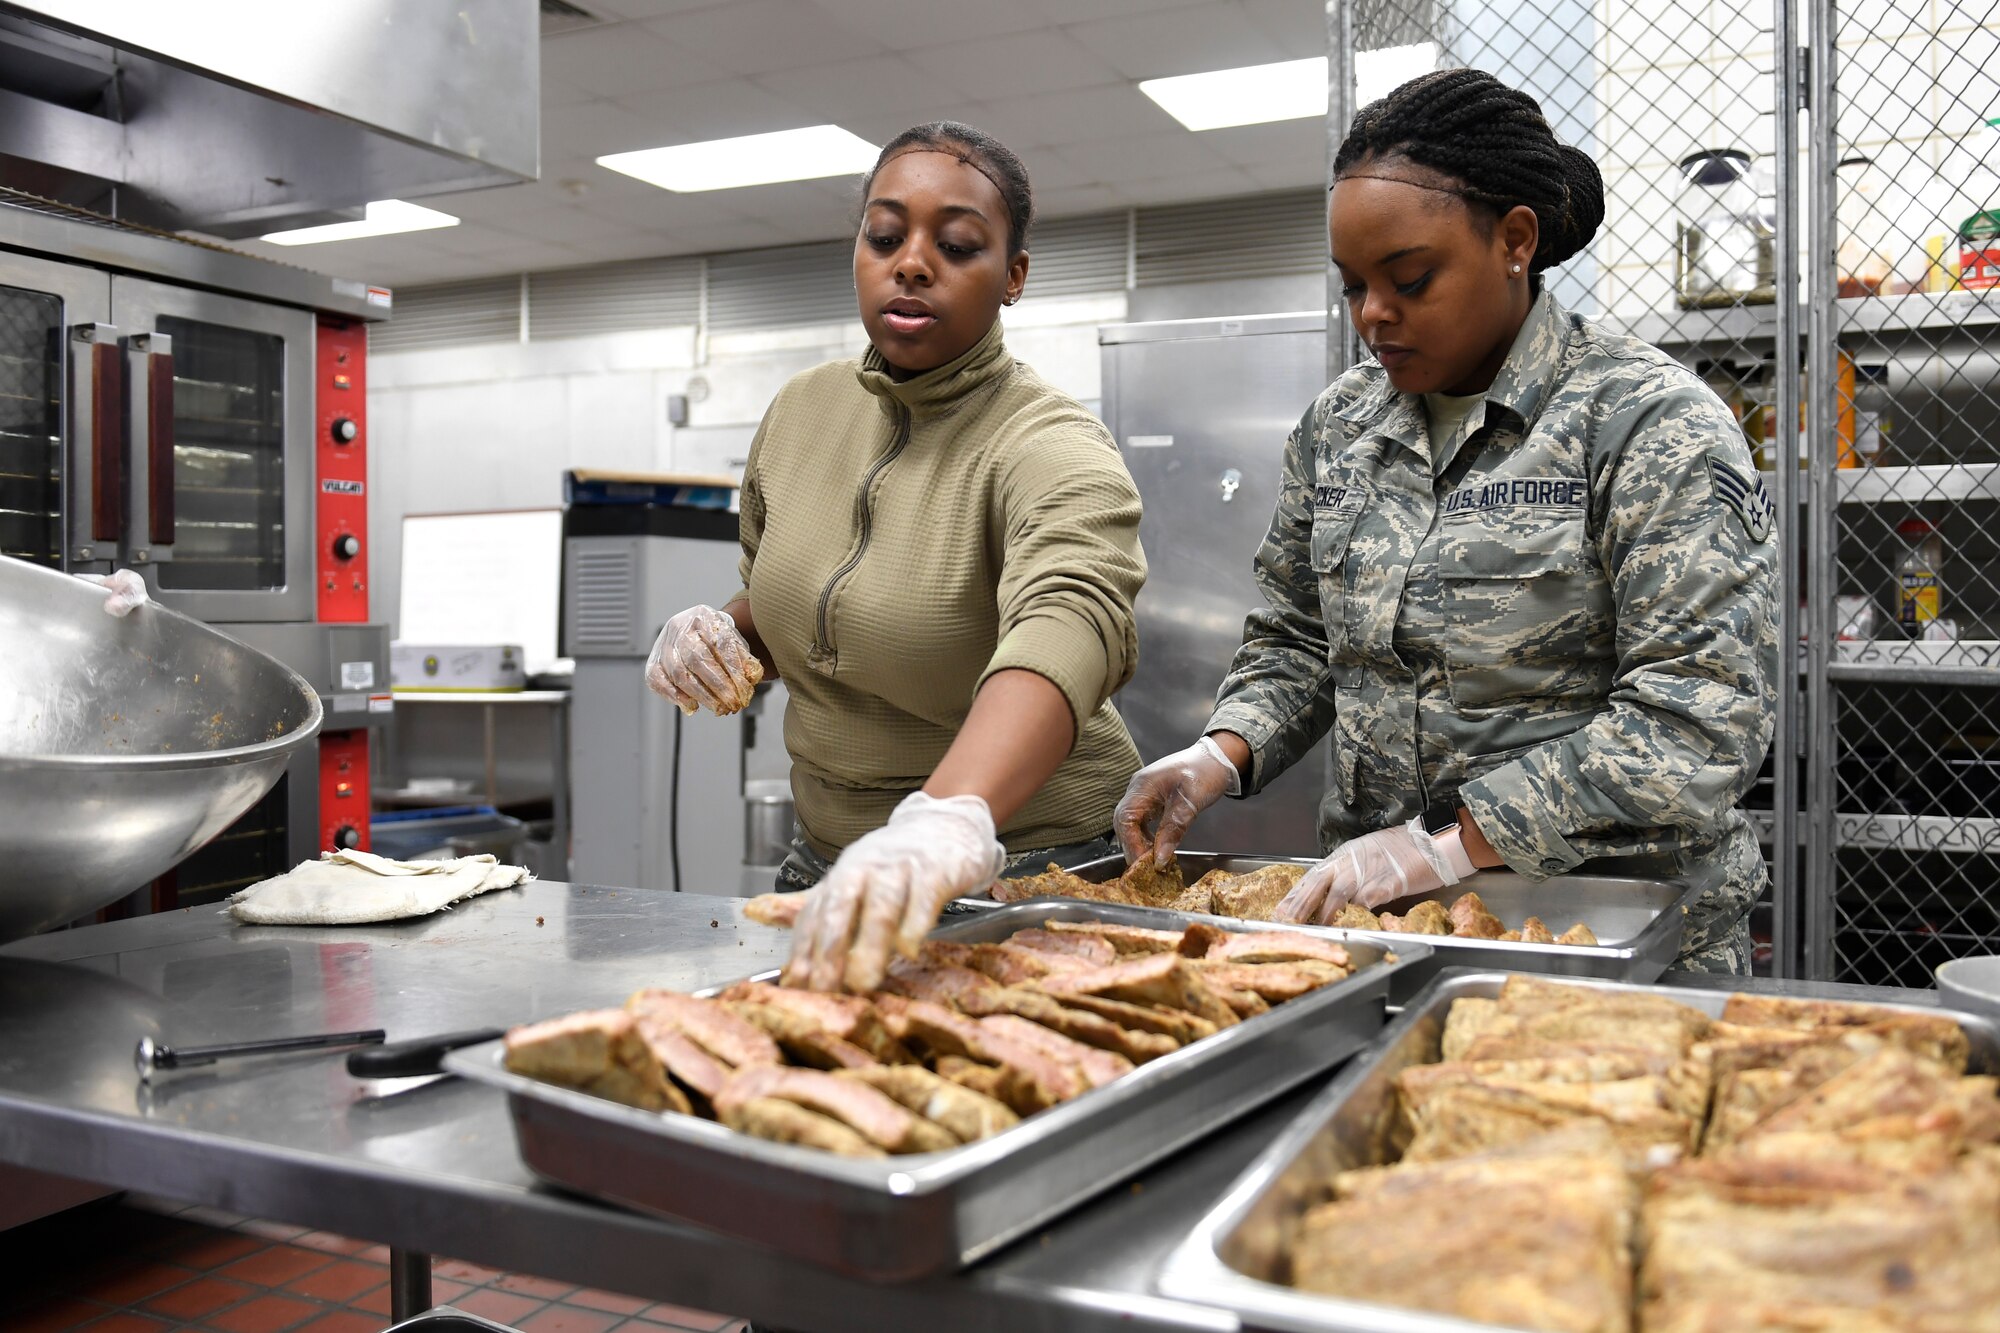 Members from both the North Carolina Air National Guard and Niagara Falls Air Reserve Station, New York, prepare lunch in the dining facility during drill weekend at the North Carolina Air National Guard Base, Charlotte Douglas International Airport, Jan. 12, 2019. Food services Airmen from the North Carolina Air National Guard train members from the Niagara Falls Air Reserve Station, New York, on full-service kitchen operations in preparation for the upcoming Air Force active duty and reserve Hennessy Award competition.